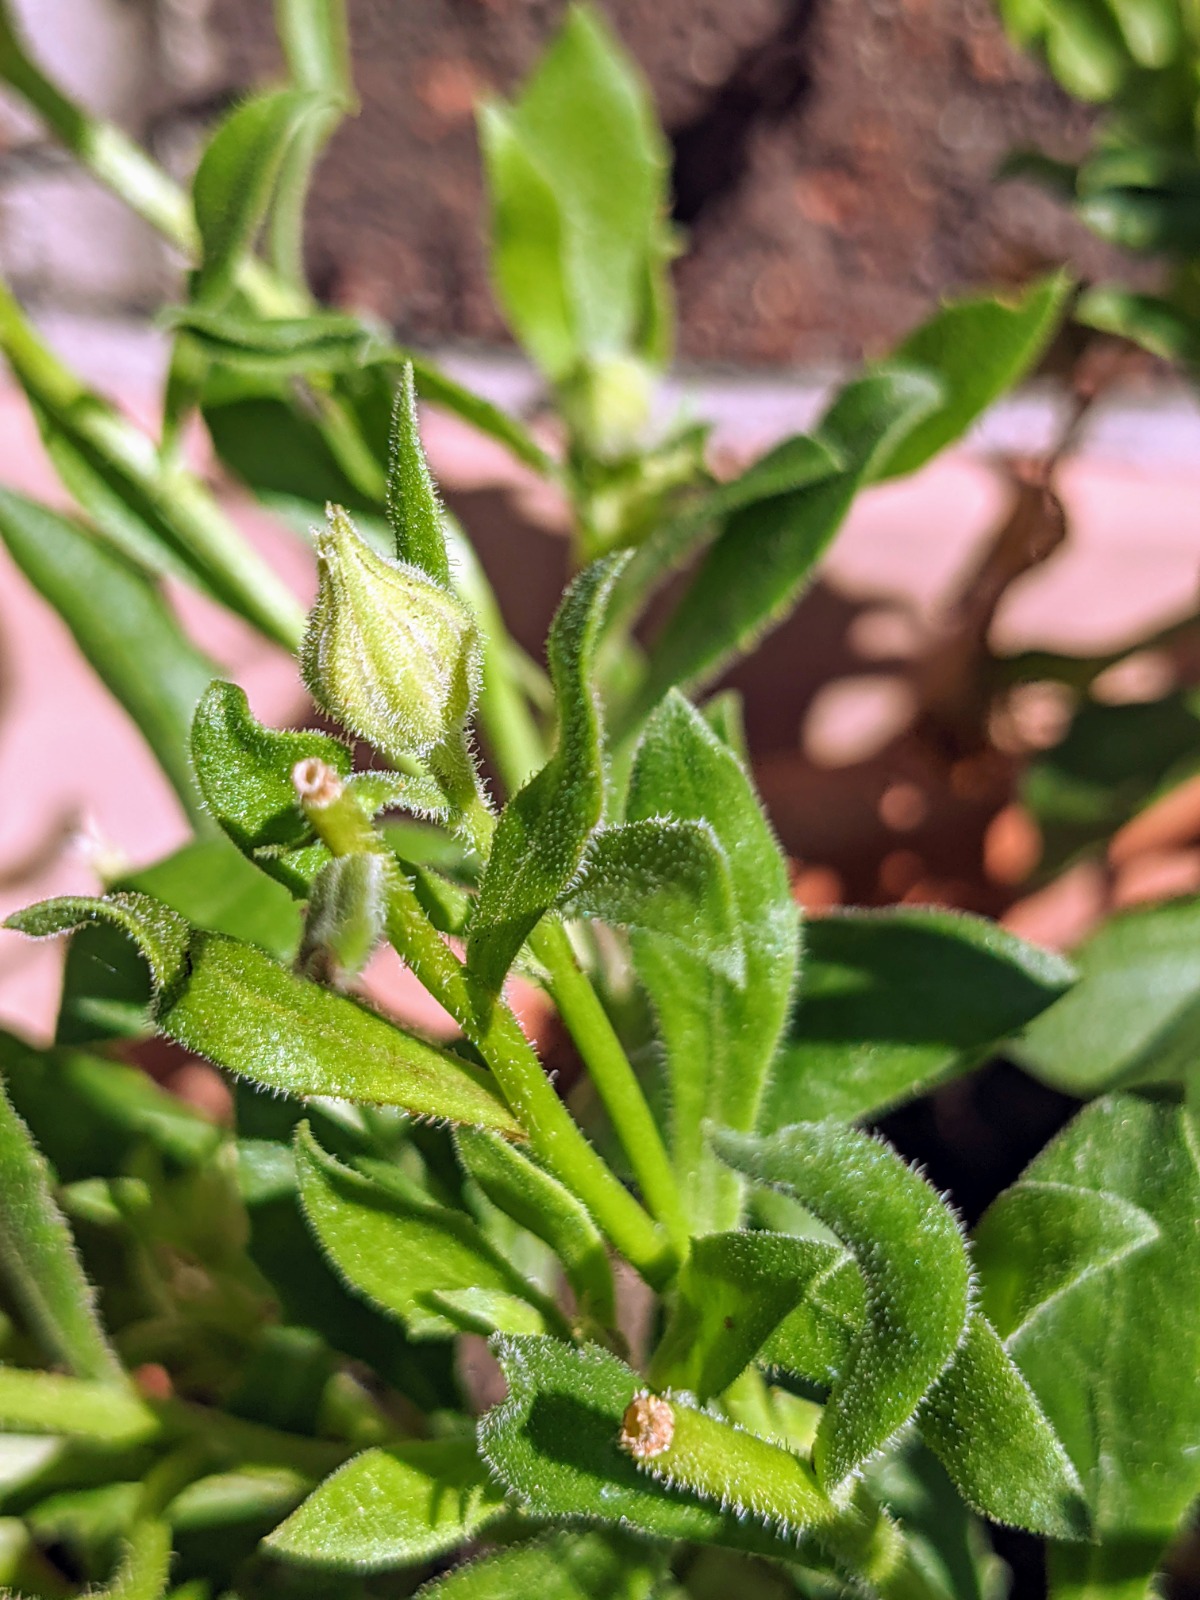 Osteospermum buds - new African Daisy flowers on the way